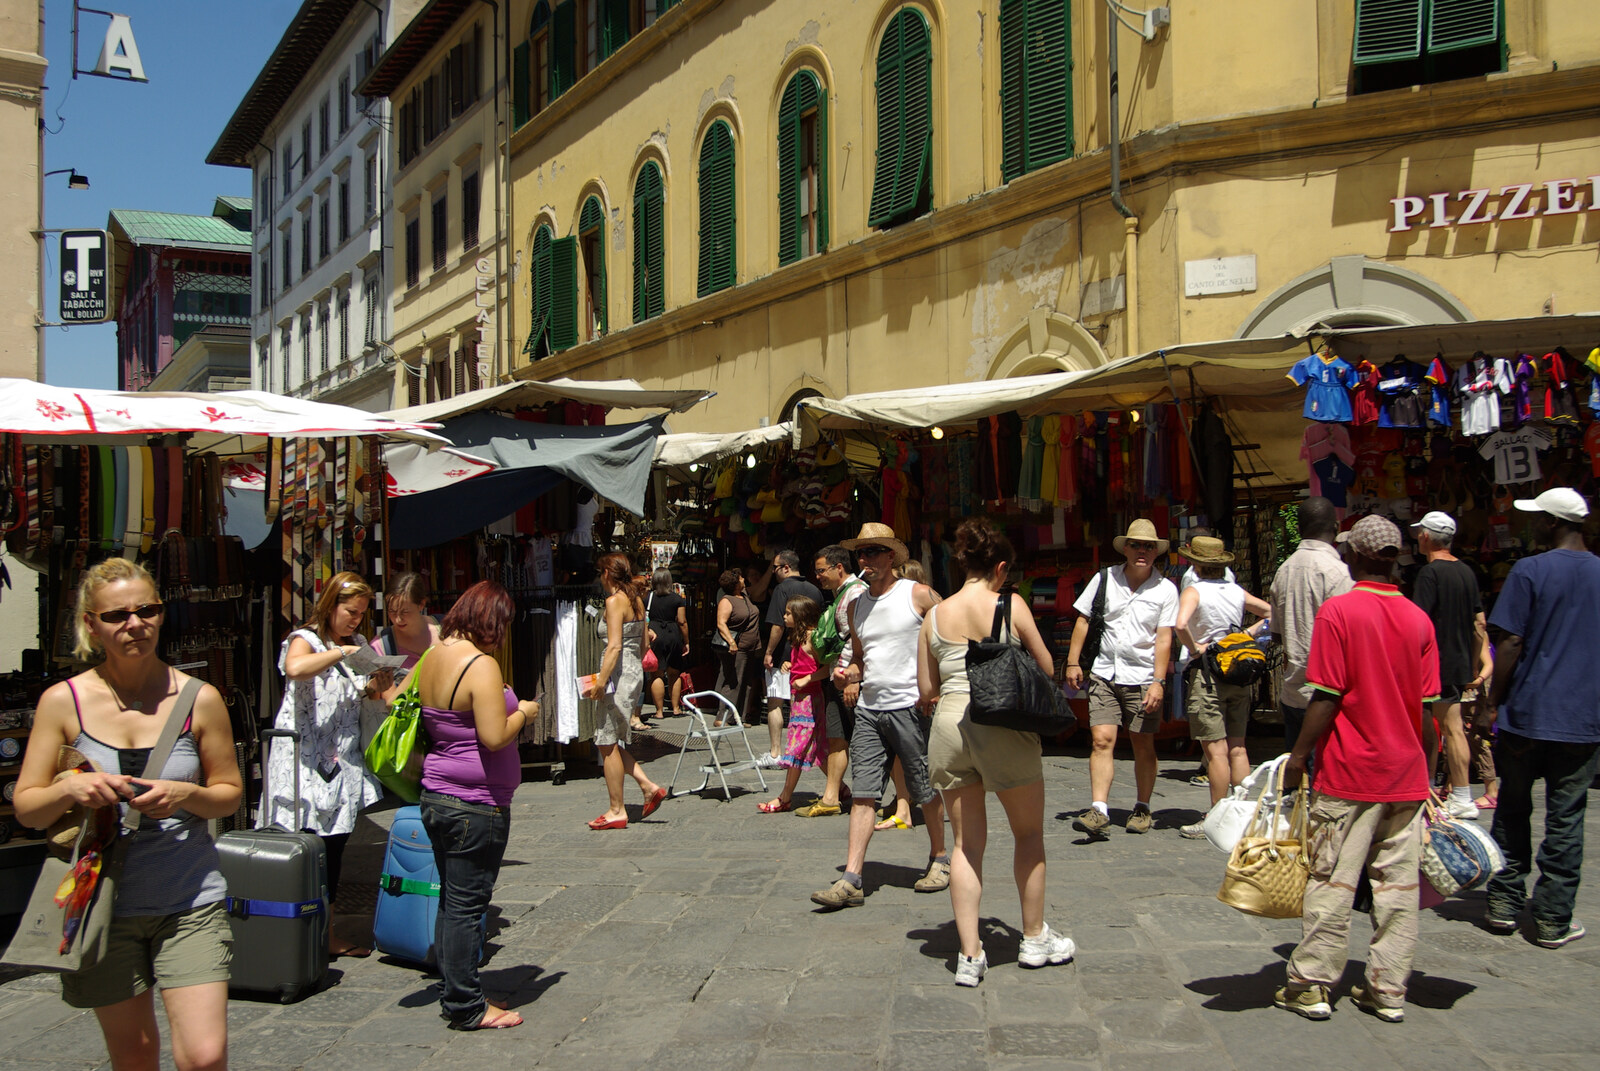 A Day Trip to Firenze, Tuscany, Italy - 24th July 2008: Teeming hordes